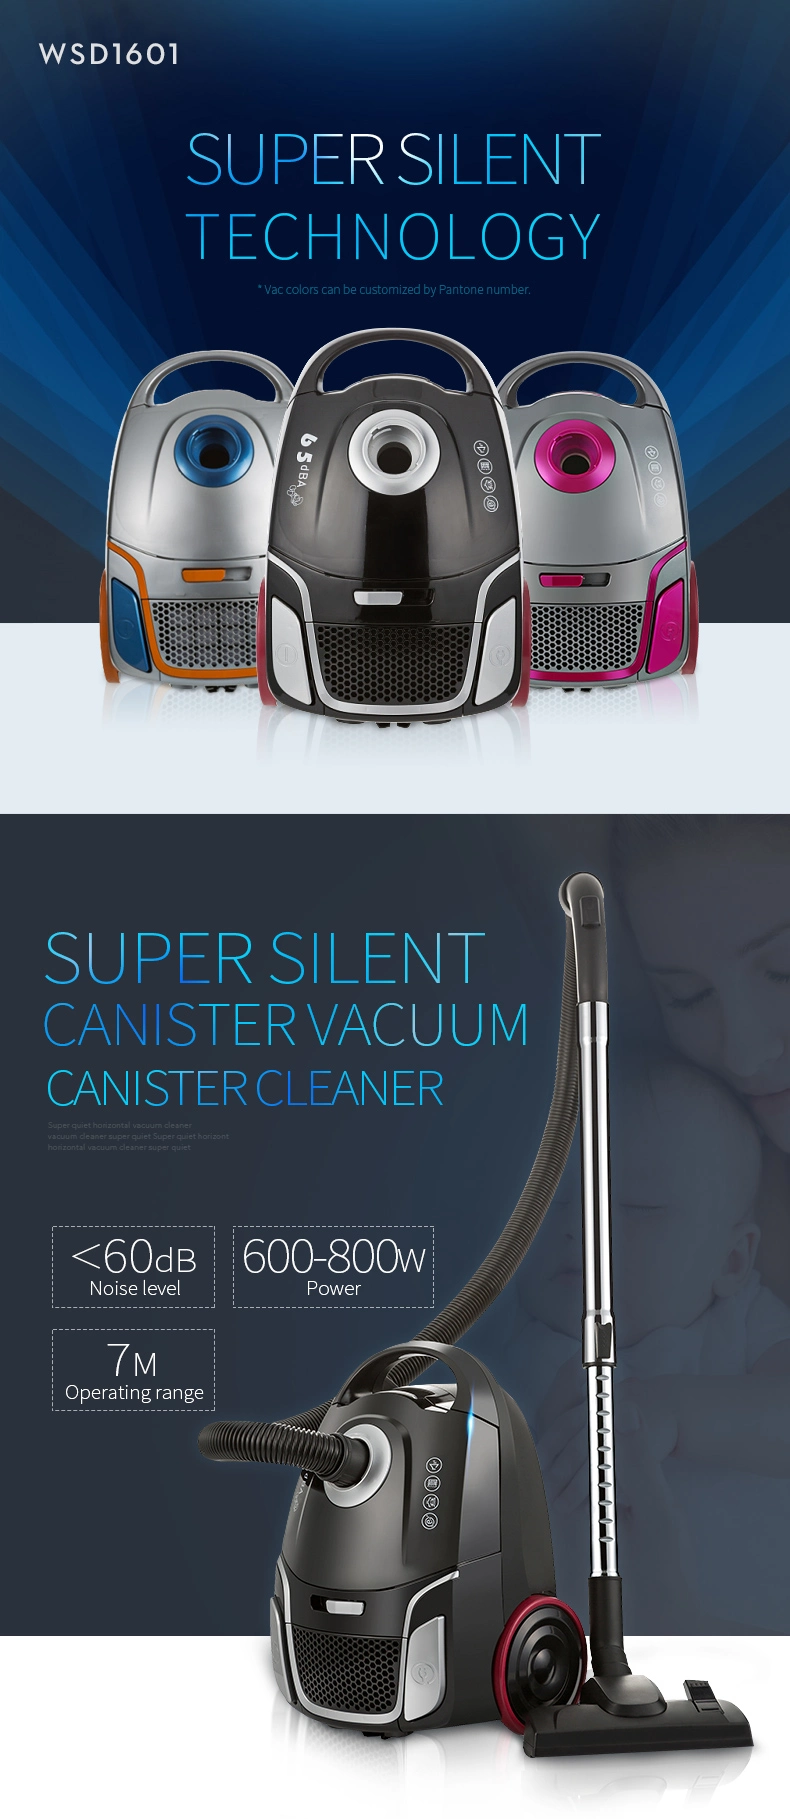 3L Dust Capacity Low Noise Bagged Canister Vacuum Cleaner for Home